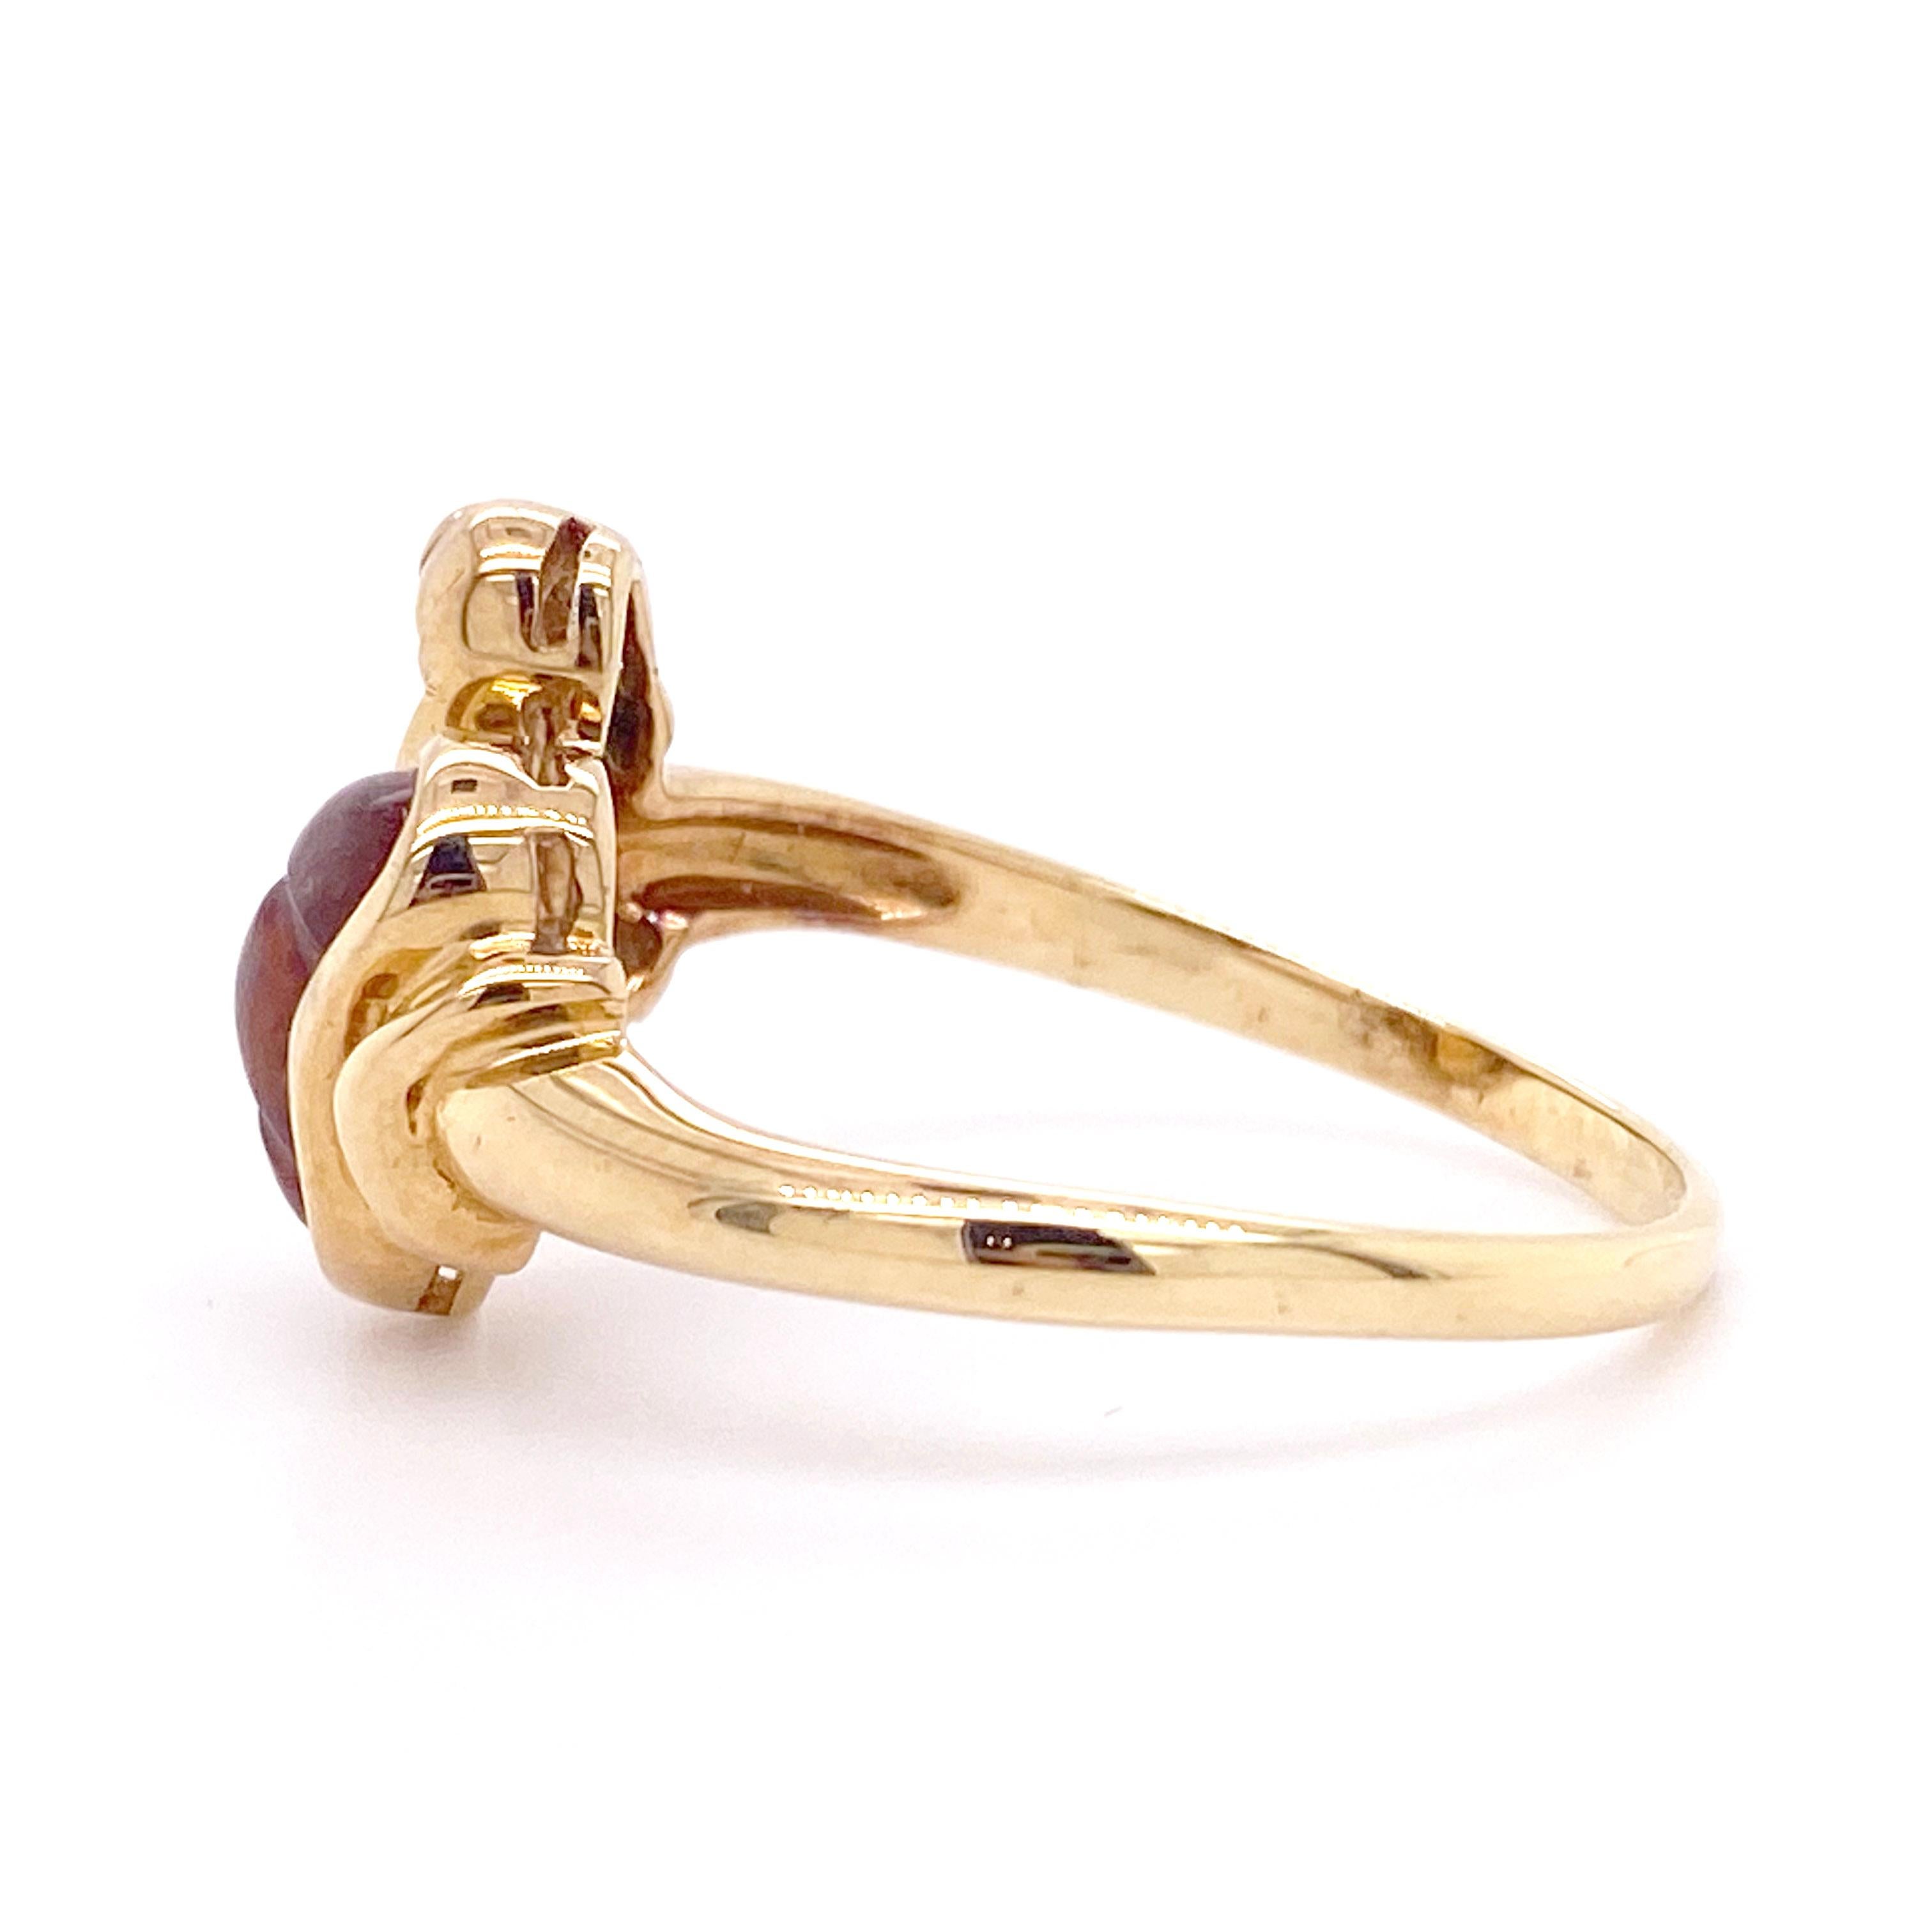 I bet you've never seen a ring like this. The design of the swan has so much character in such a small piece. The details for this beautiful ring are listed below:
Metal Quality: 18 karat Yellow Gold
Band Width: 3.94 millimeters (tapers to